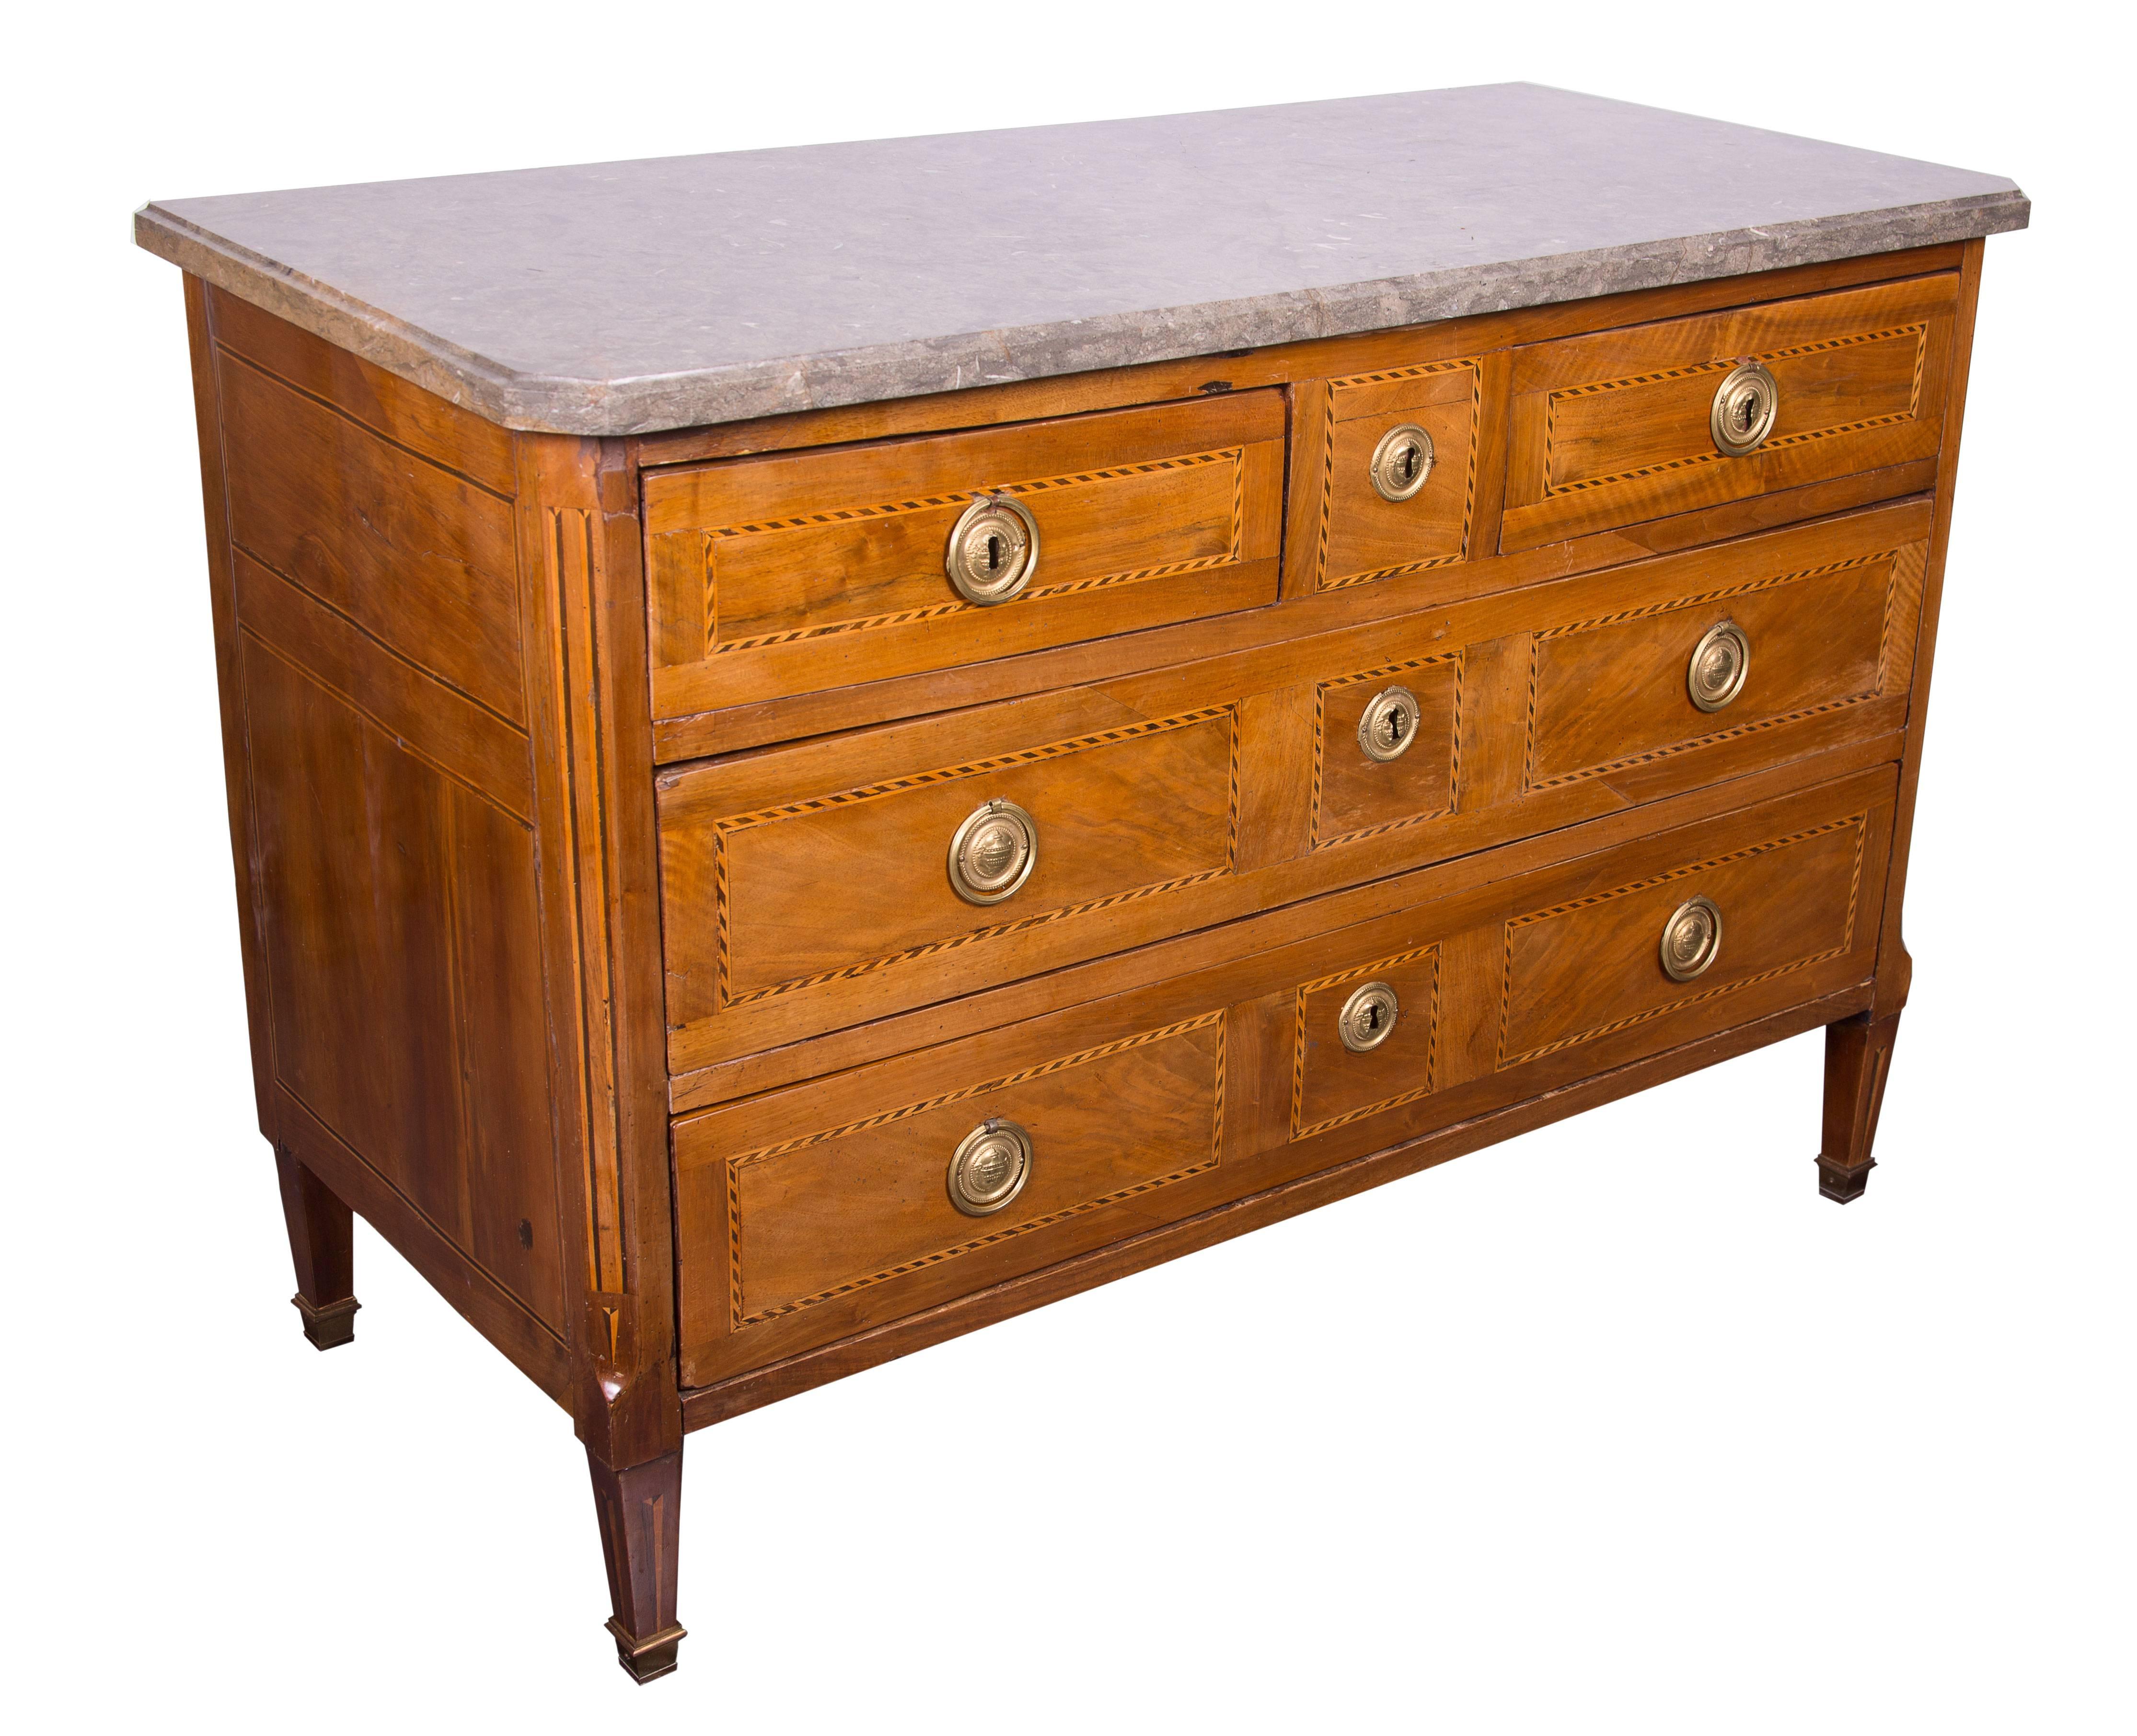 18th century Italian neoclassic walnut and fruitwood commode with a delicate inlaid design. The rectangular marble top over two short drawers and two long drawers inlaid with satin and walnut woods. Raised on straight tapering legs with brass caps.